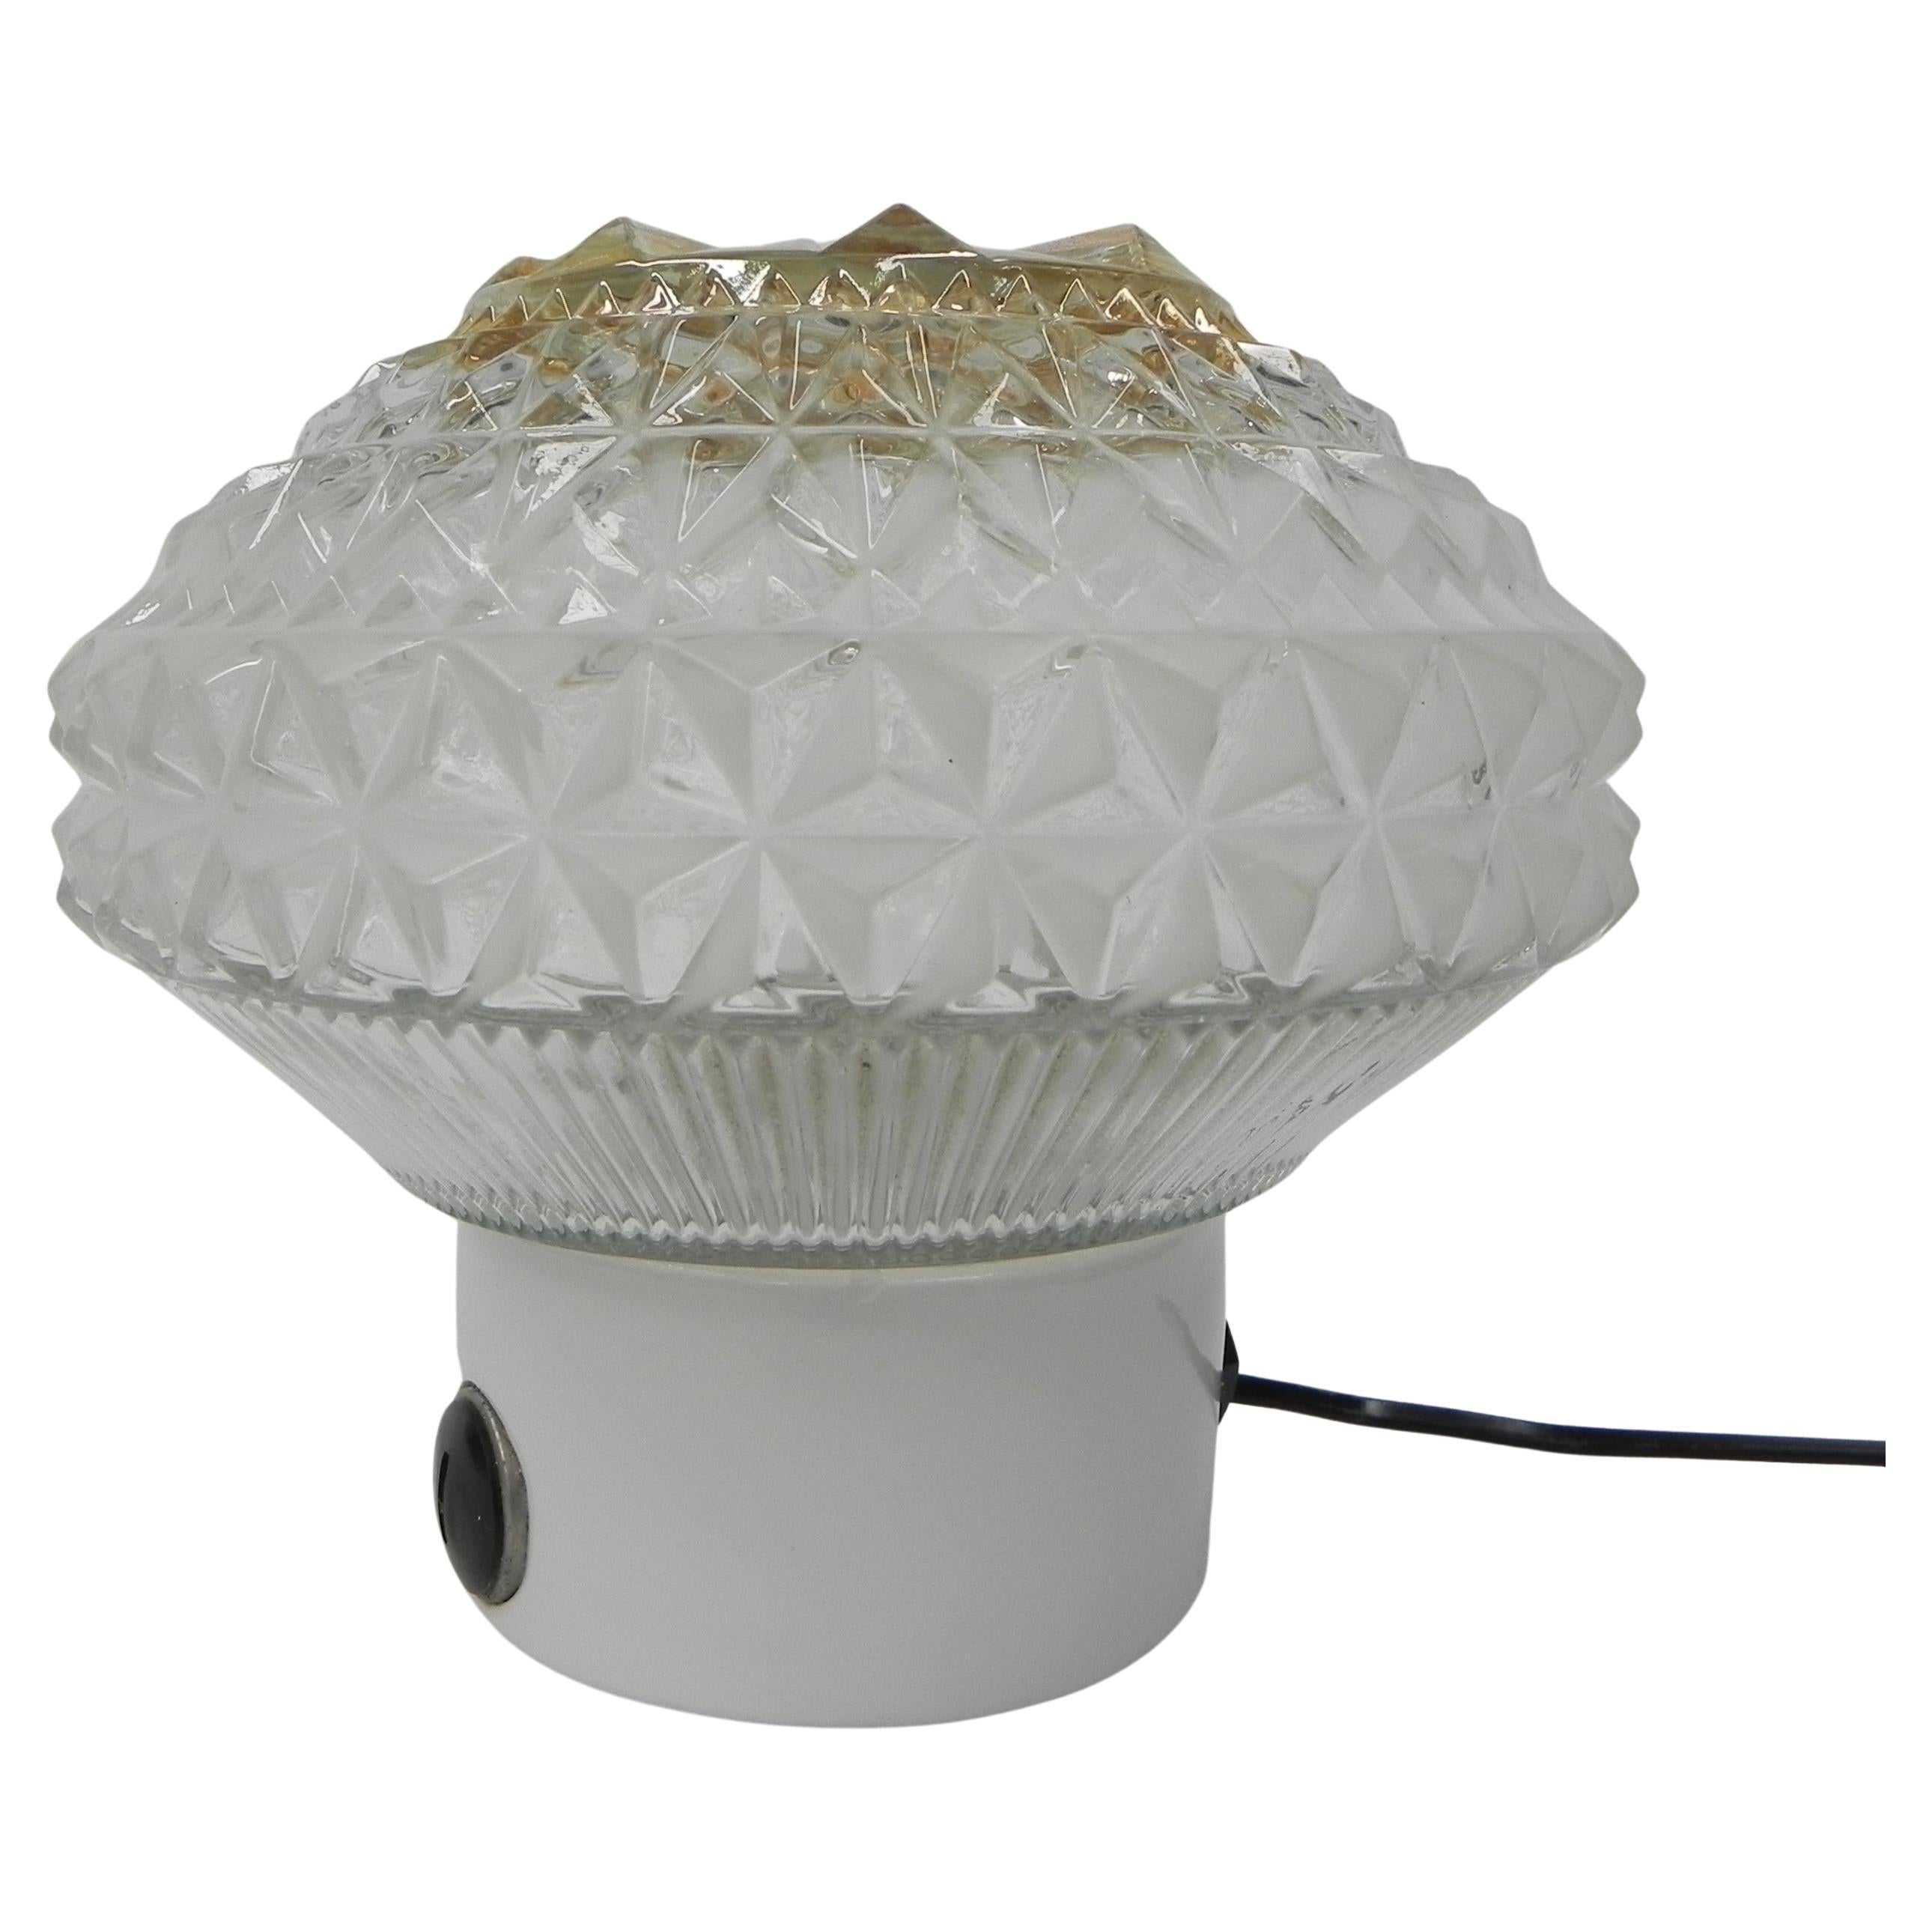 Vintage ceiling lamp with glass shade